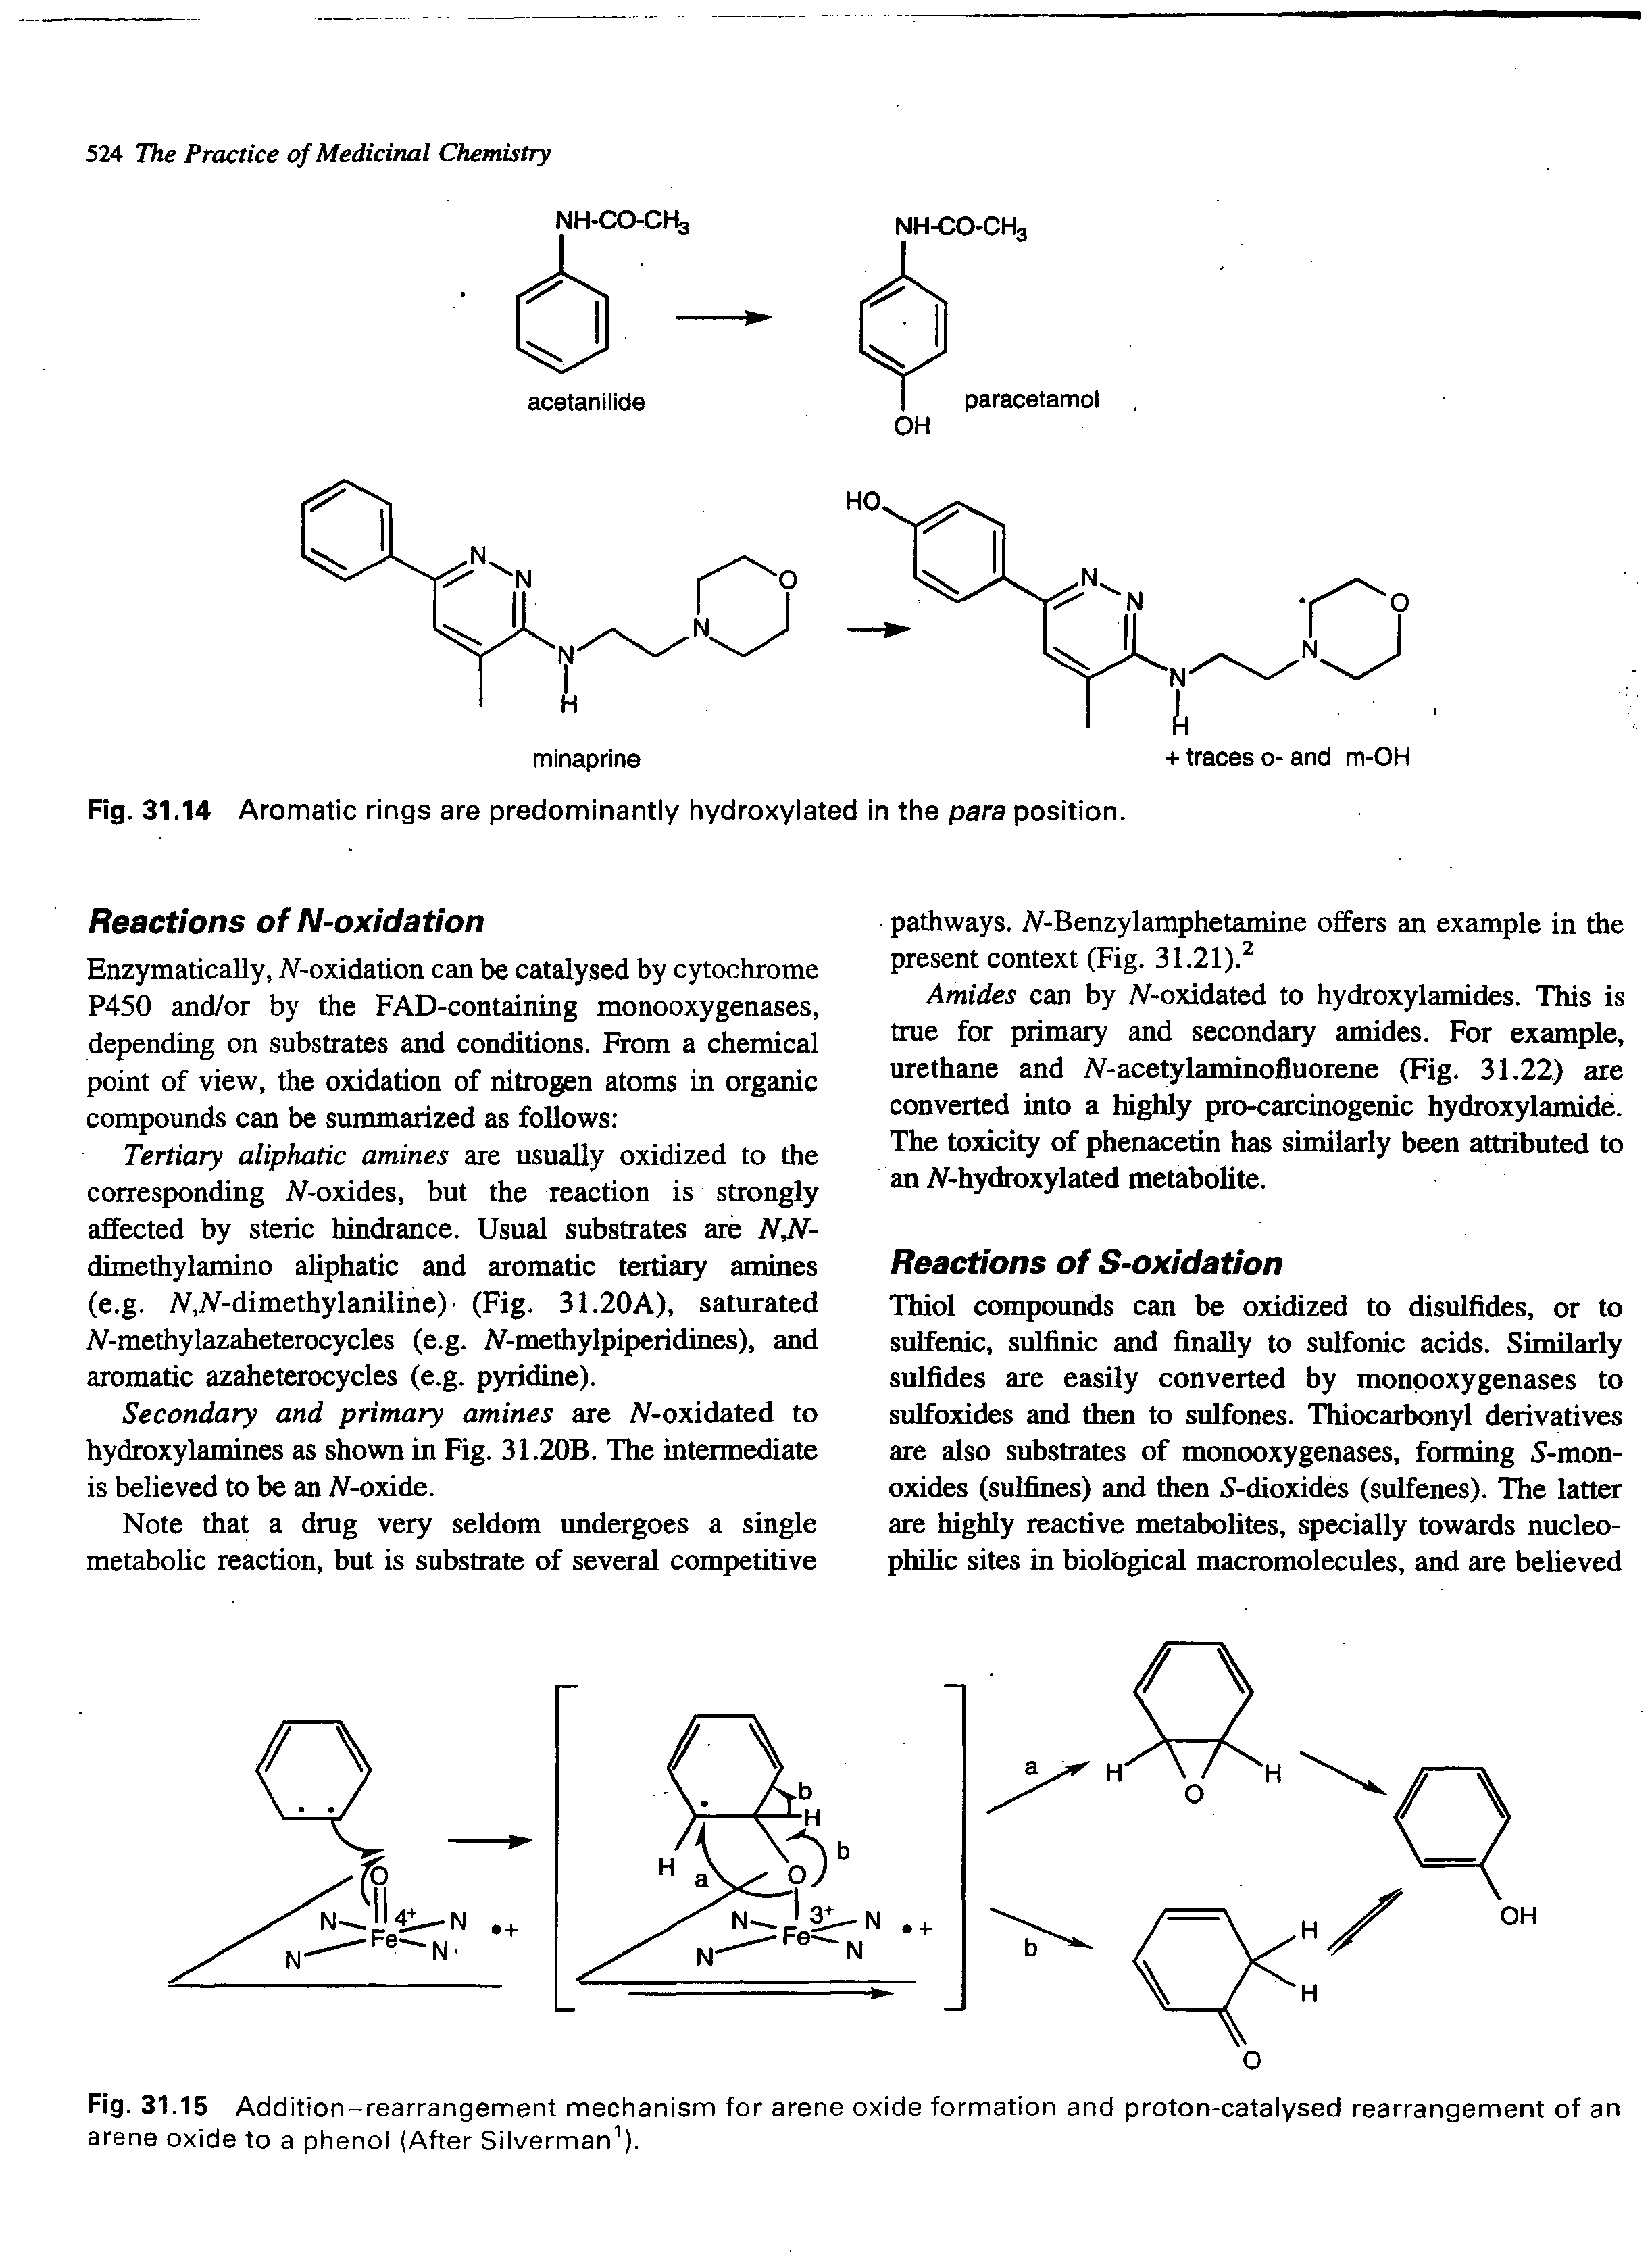 Fig. 31.15 Addition-rearrangement mechanism for arene oxide formation and proton-catalysed rearrangement of an arena oxide to a phenol (After Silverman ).